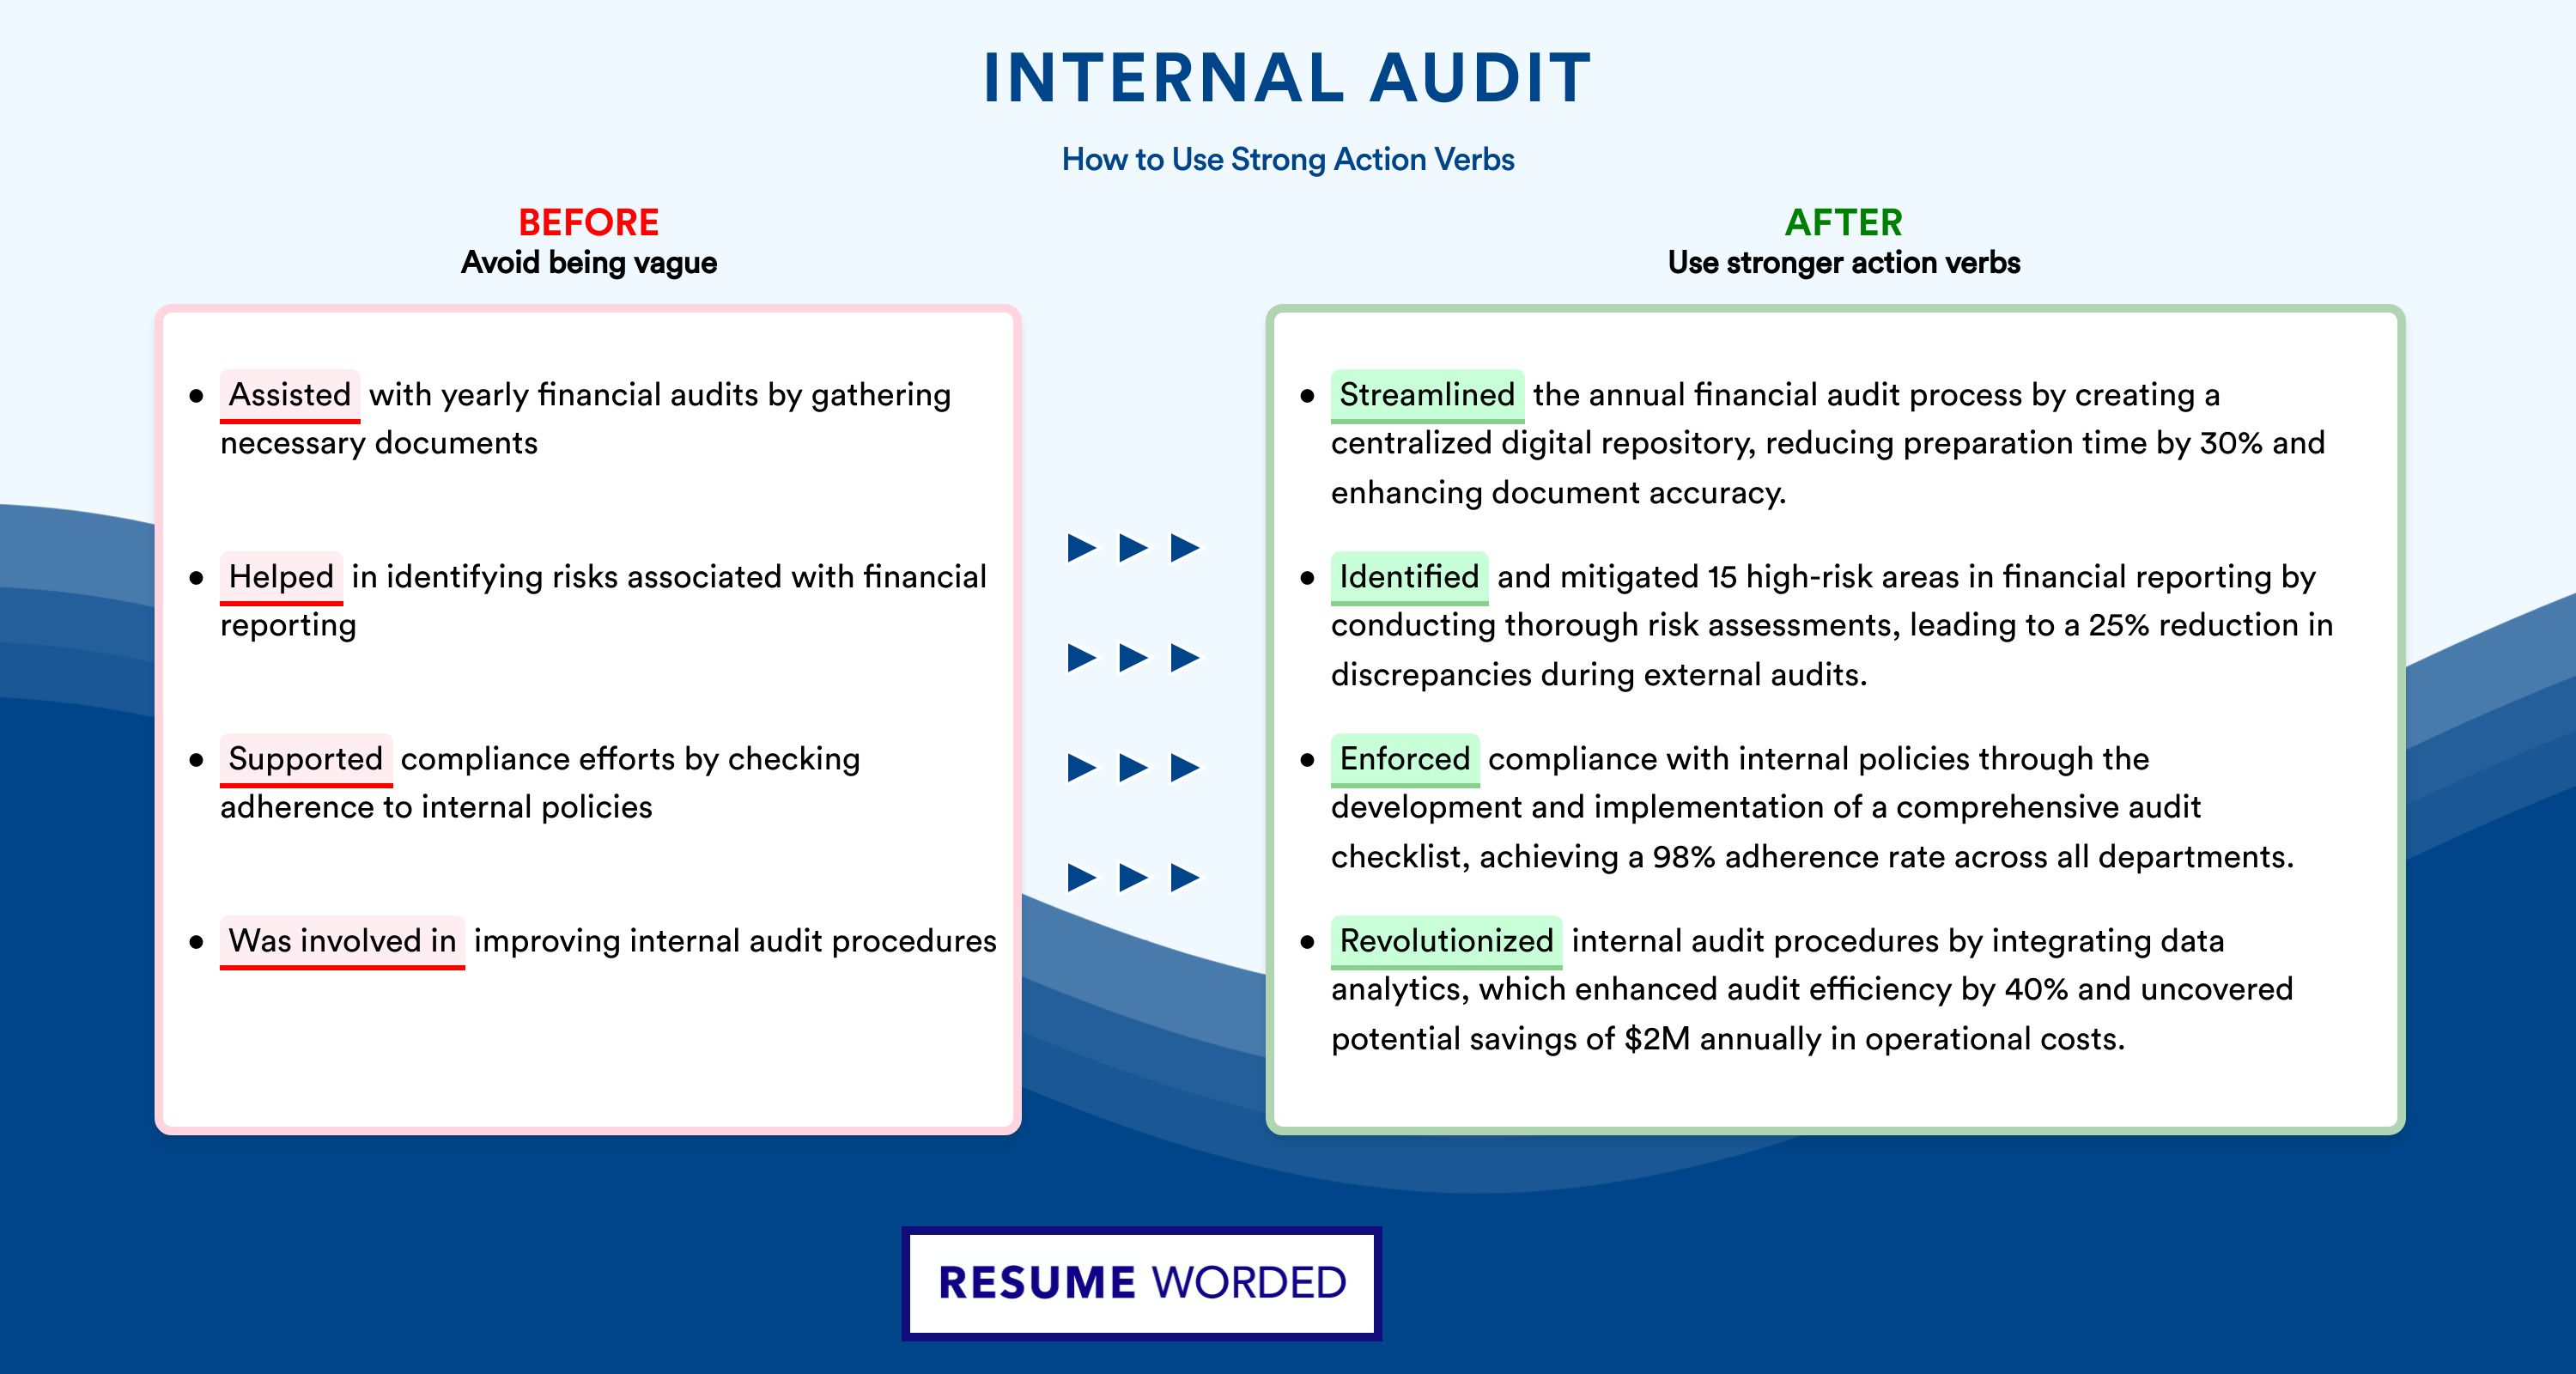 Action Verbs for Internal Audit